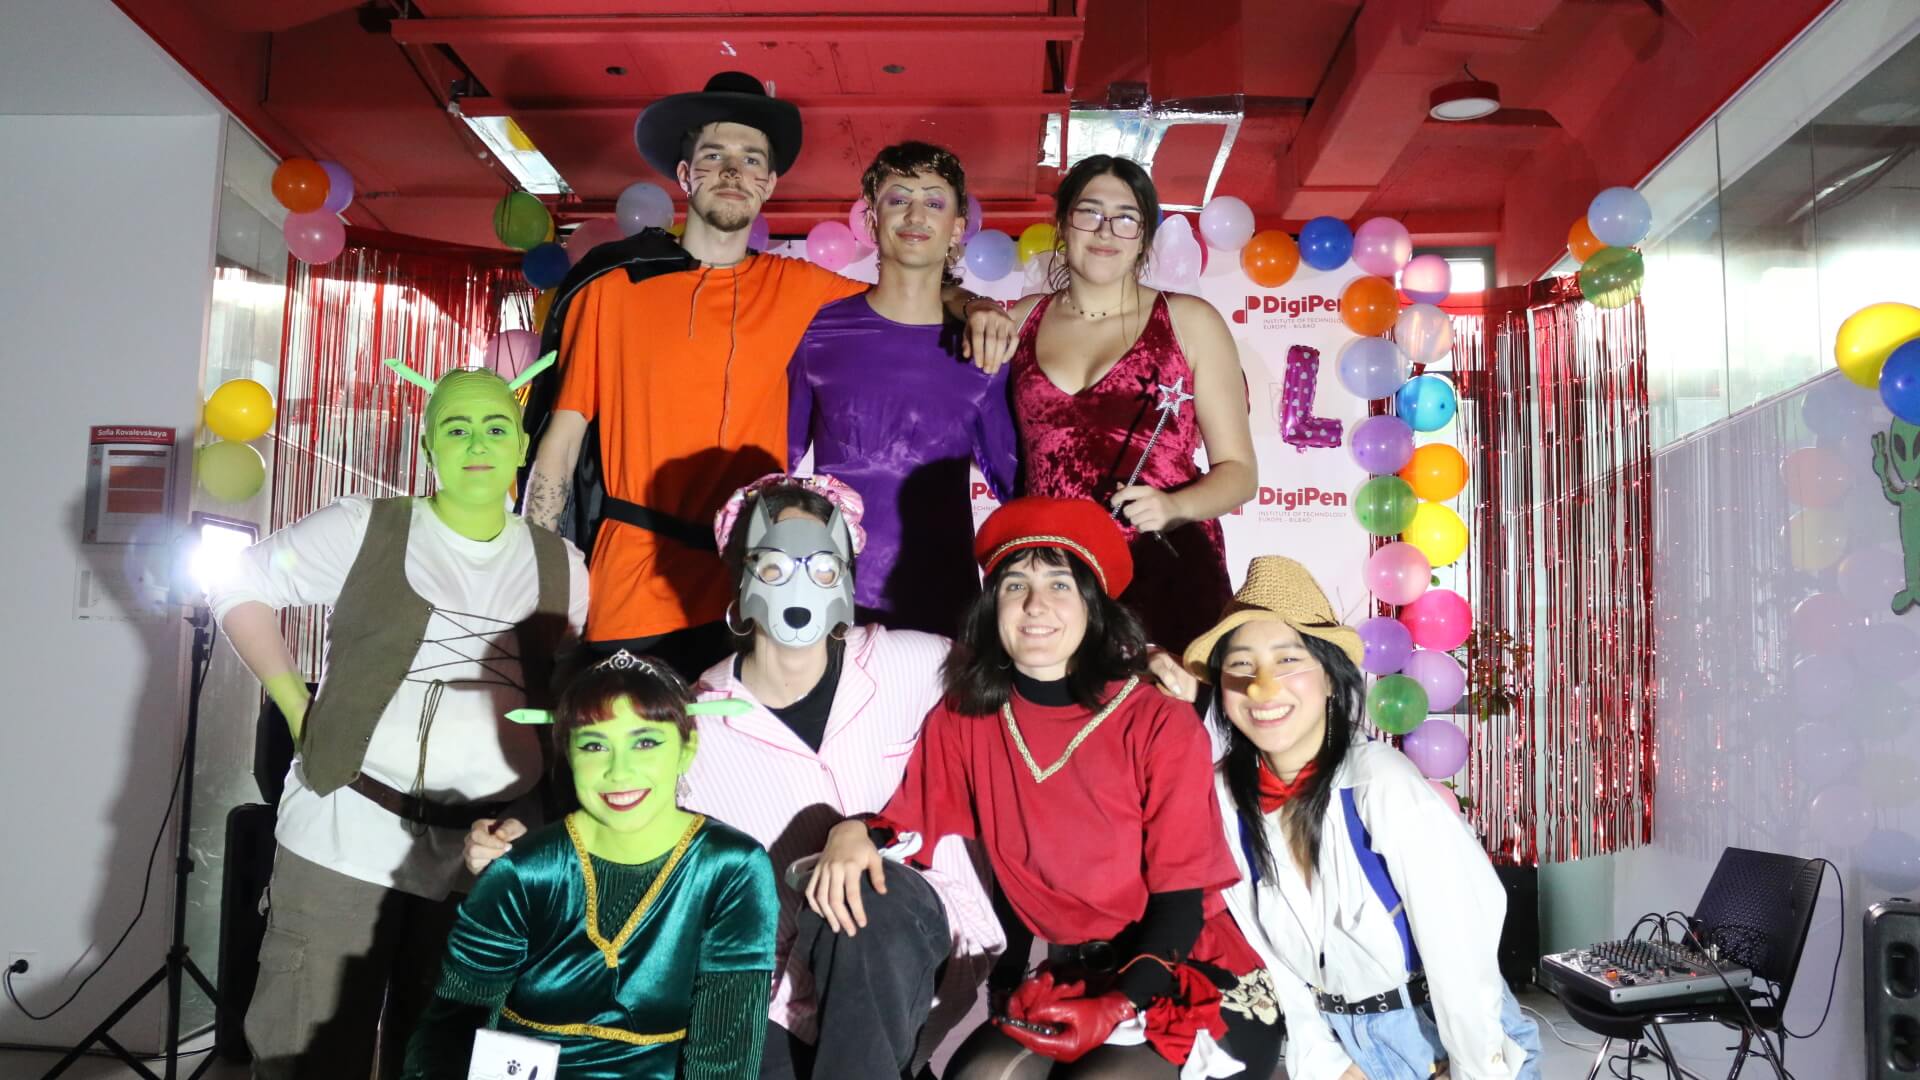 Various students pose for a photo dressed in costumes